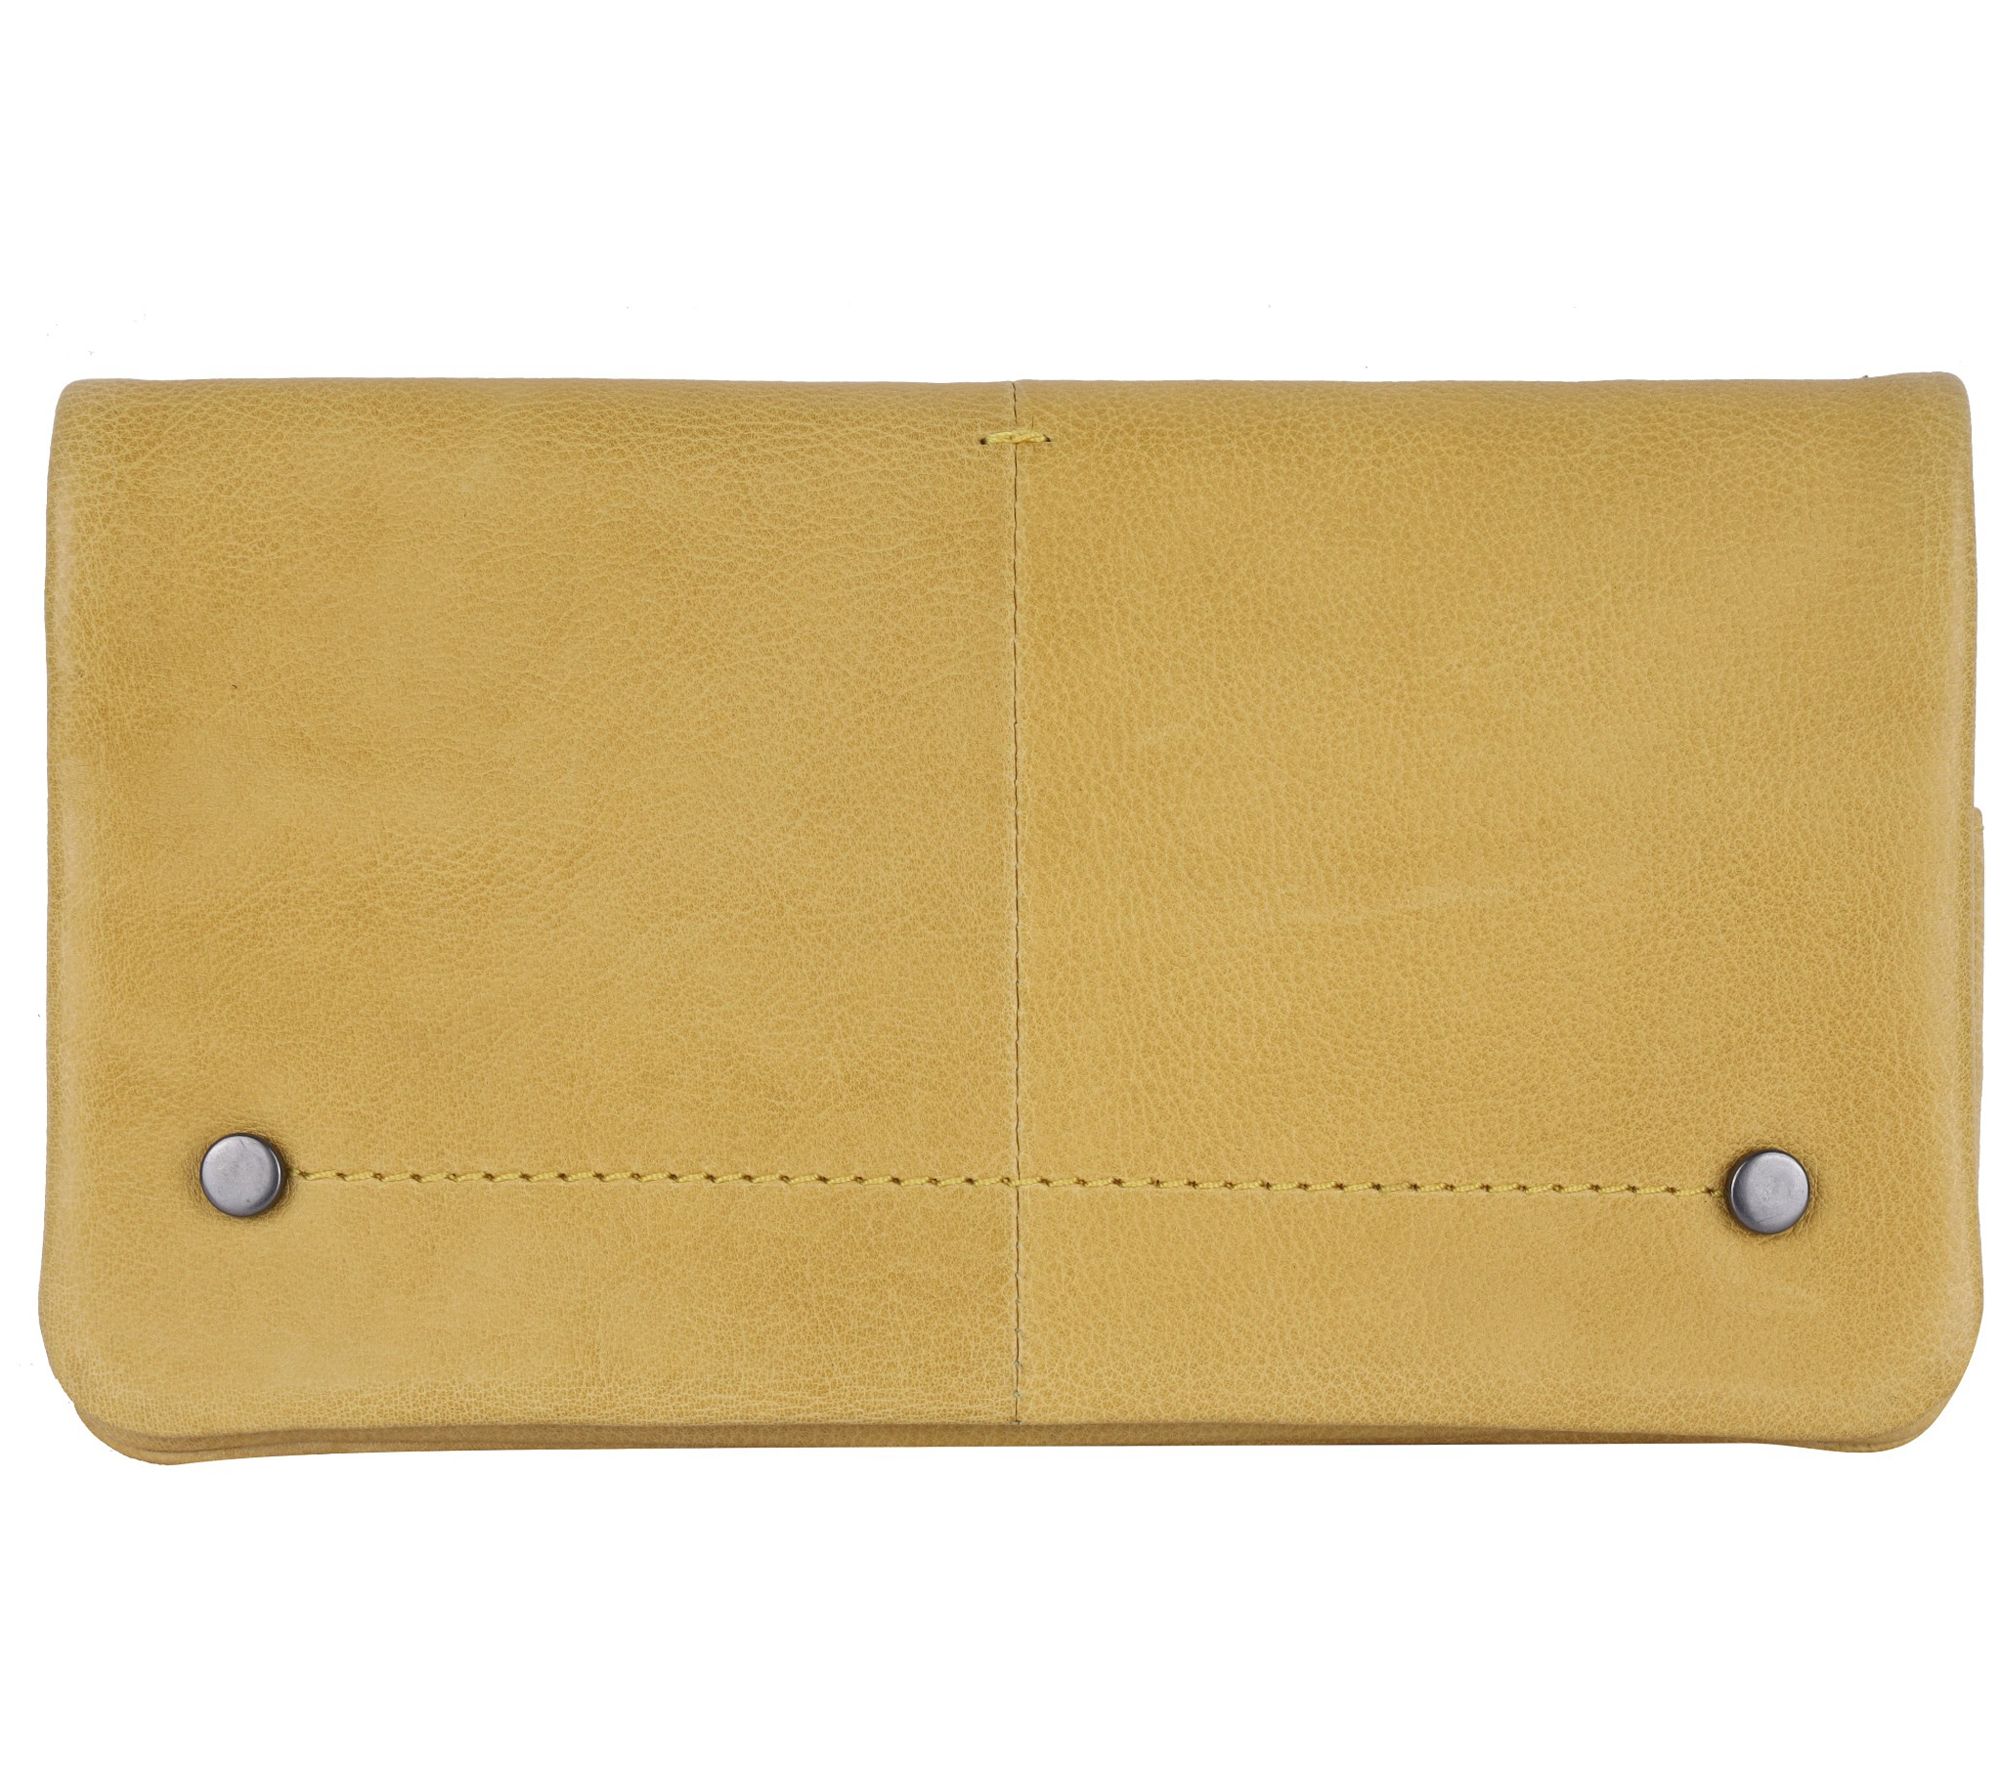 Latico Leathers Wallet - Terry - QVC.com